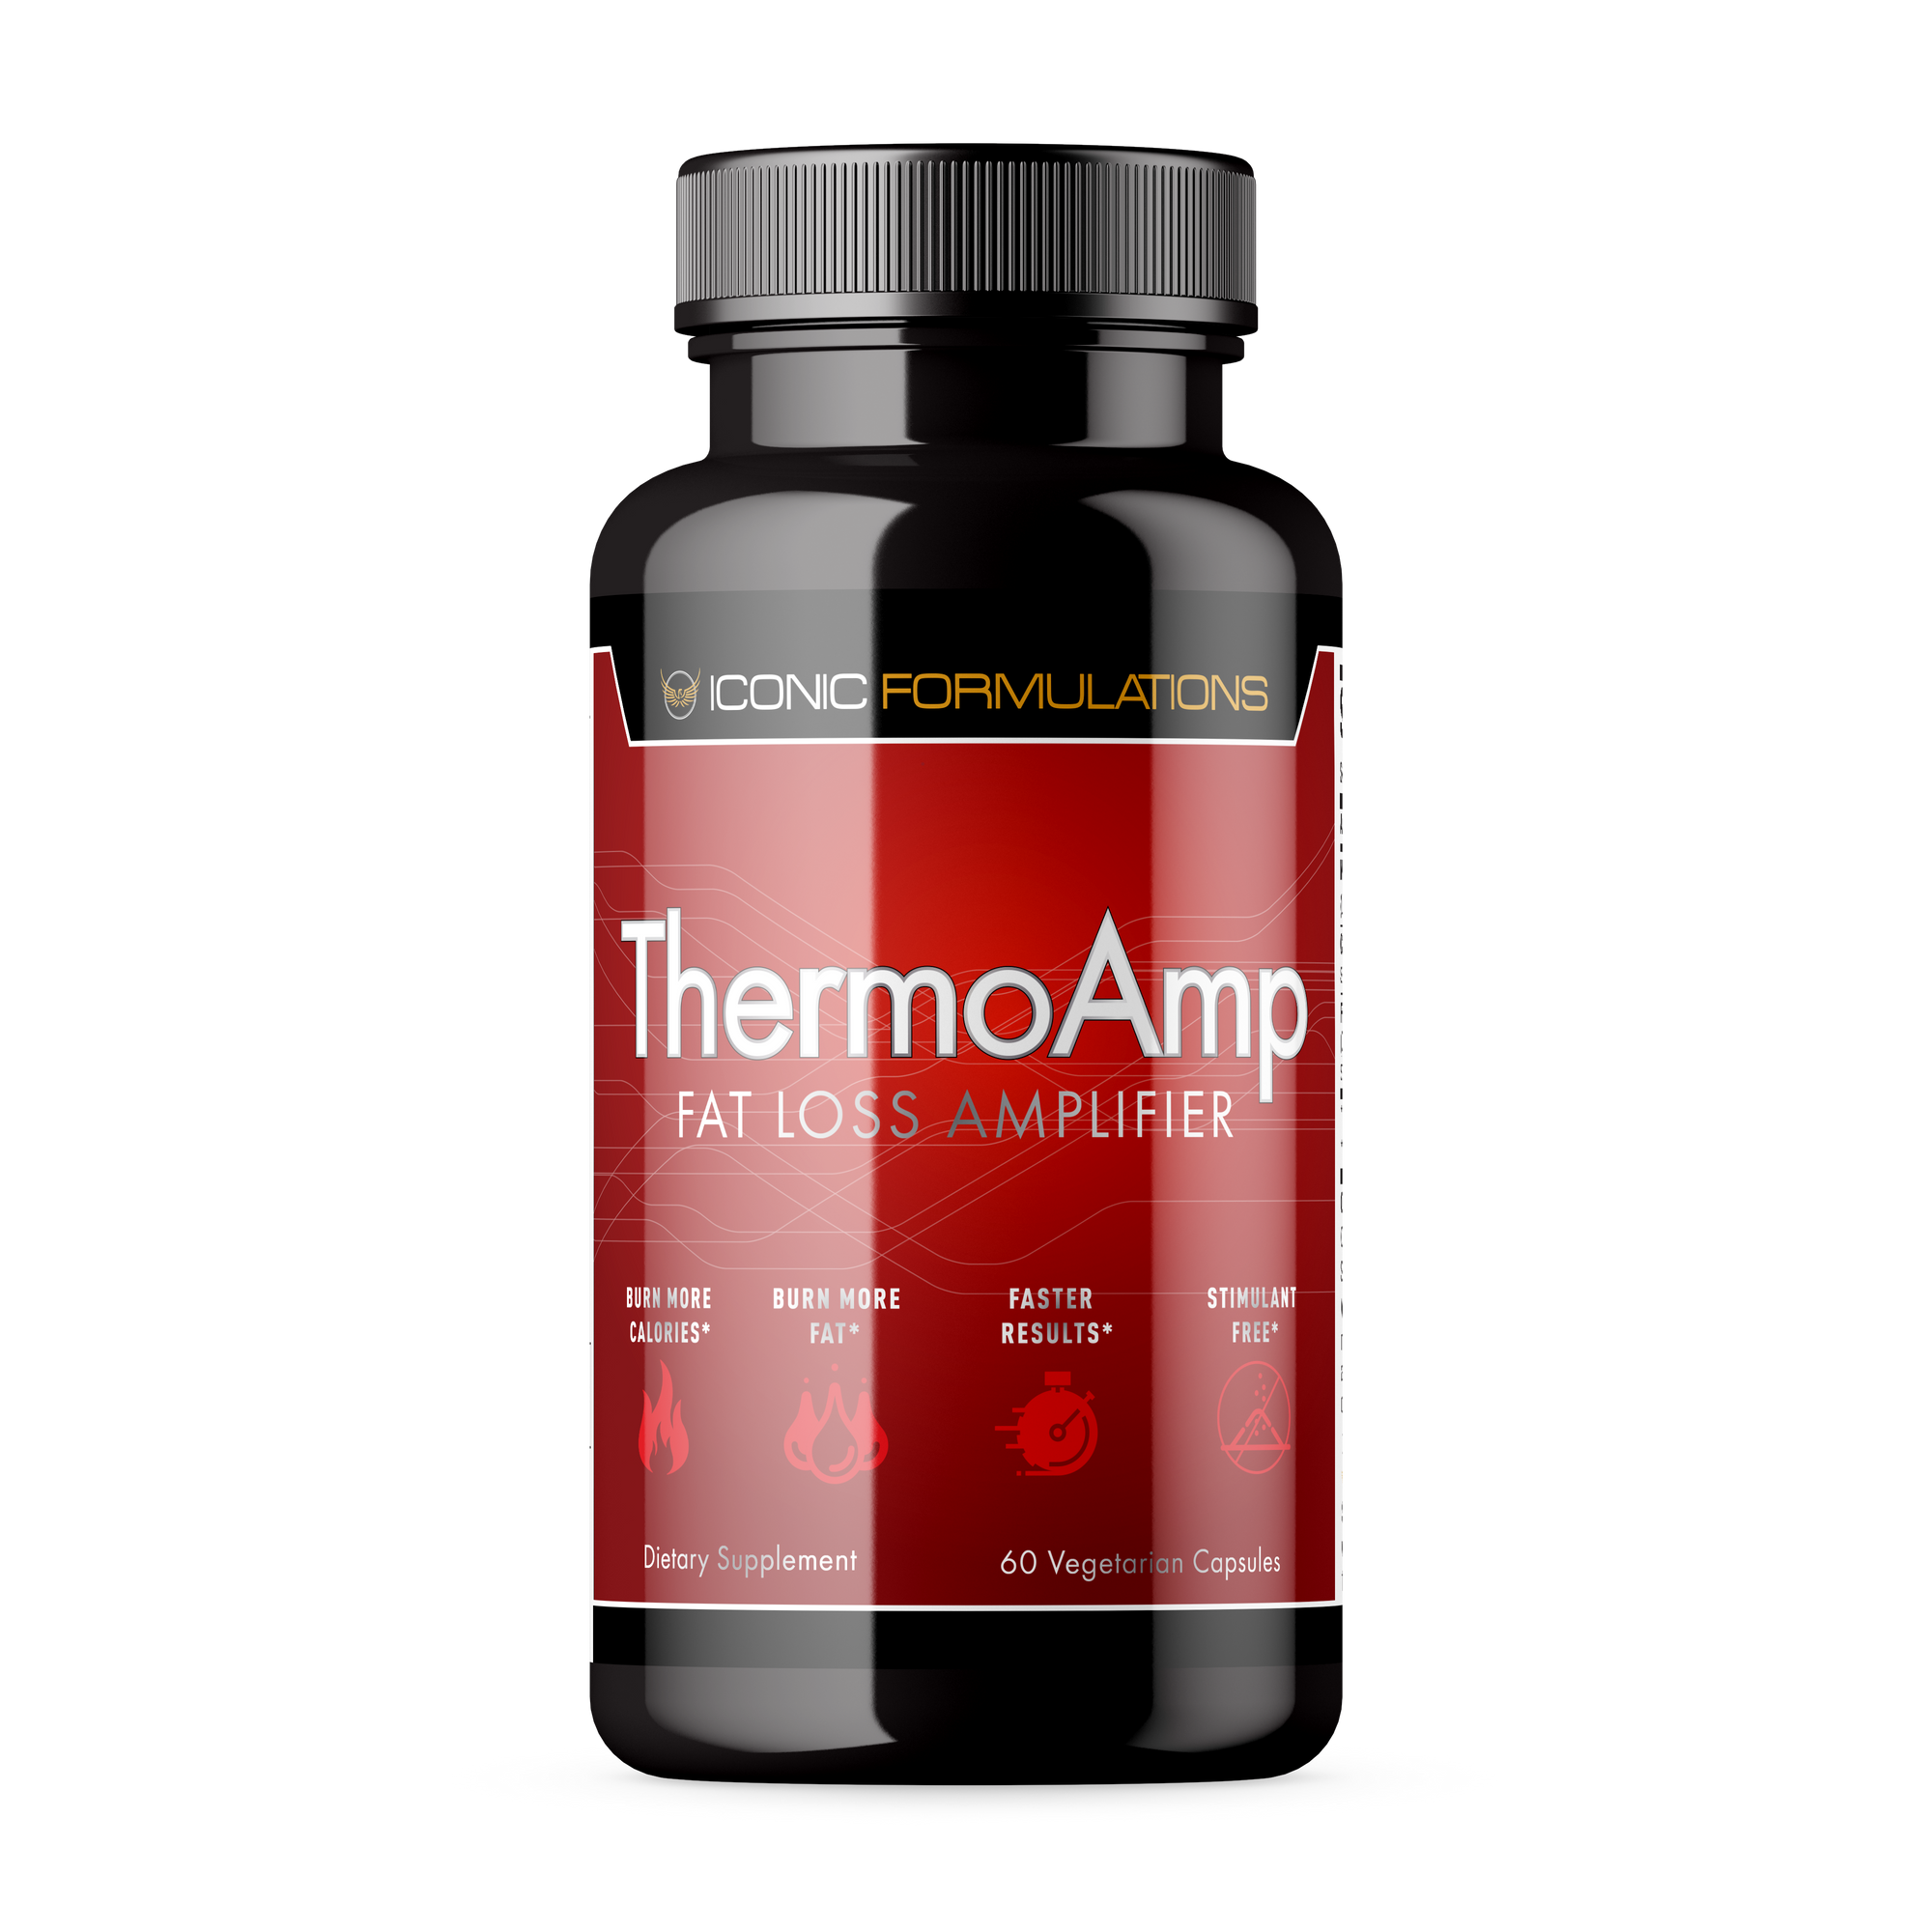 ThermoAmp